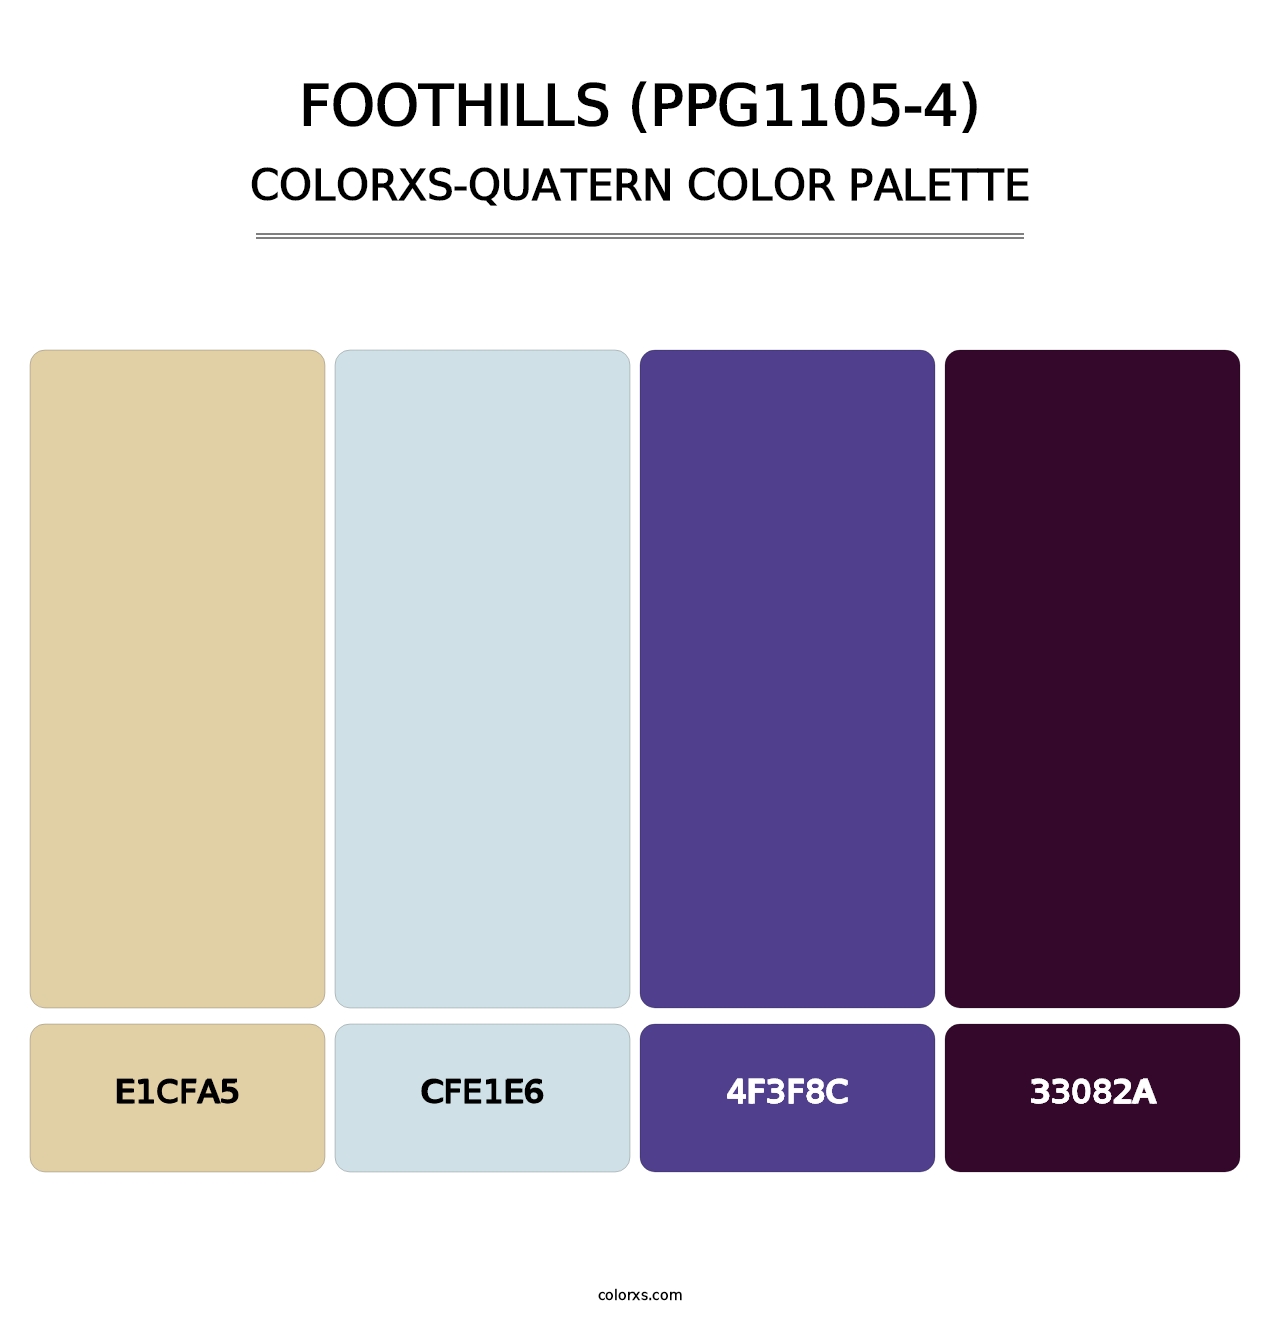 Foothills (PPG1105-4) - Colorxs Quatern Palette